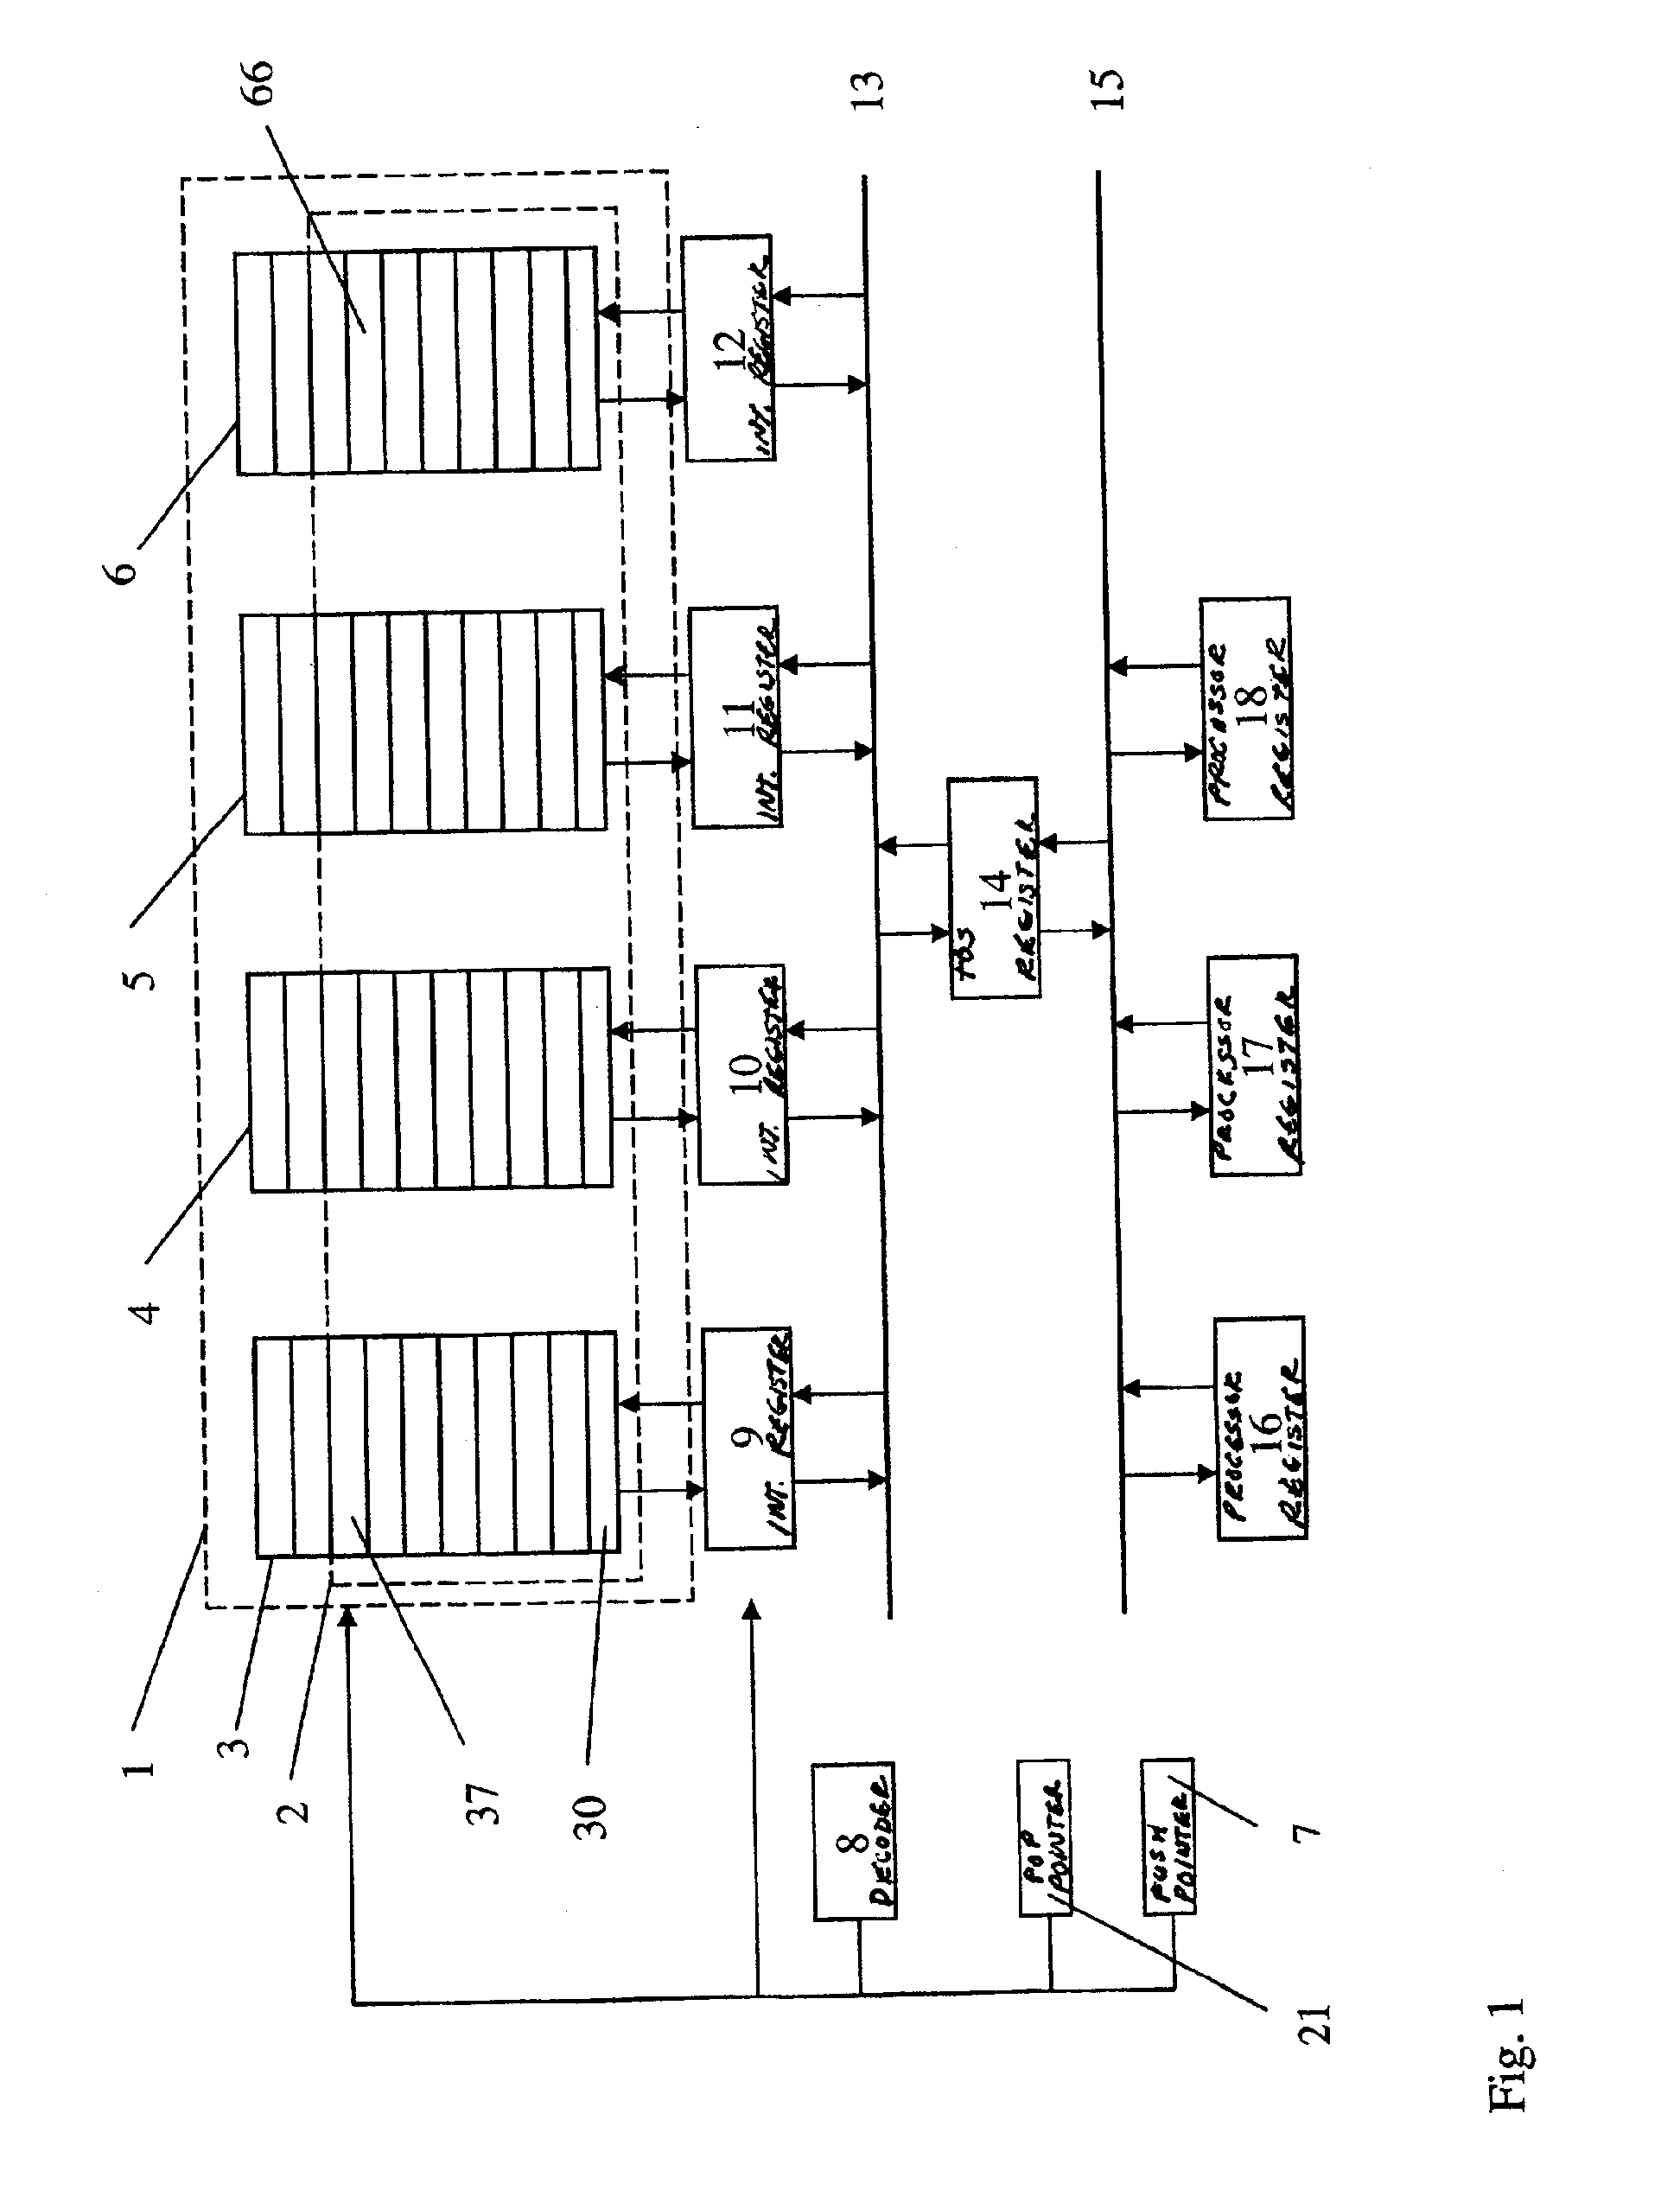 Method and arrangement in a stack having a memory segmented into data groups having a plurality of elements